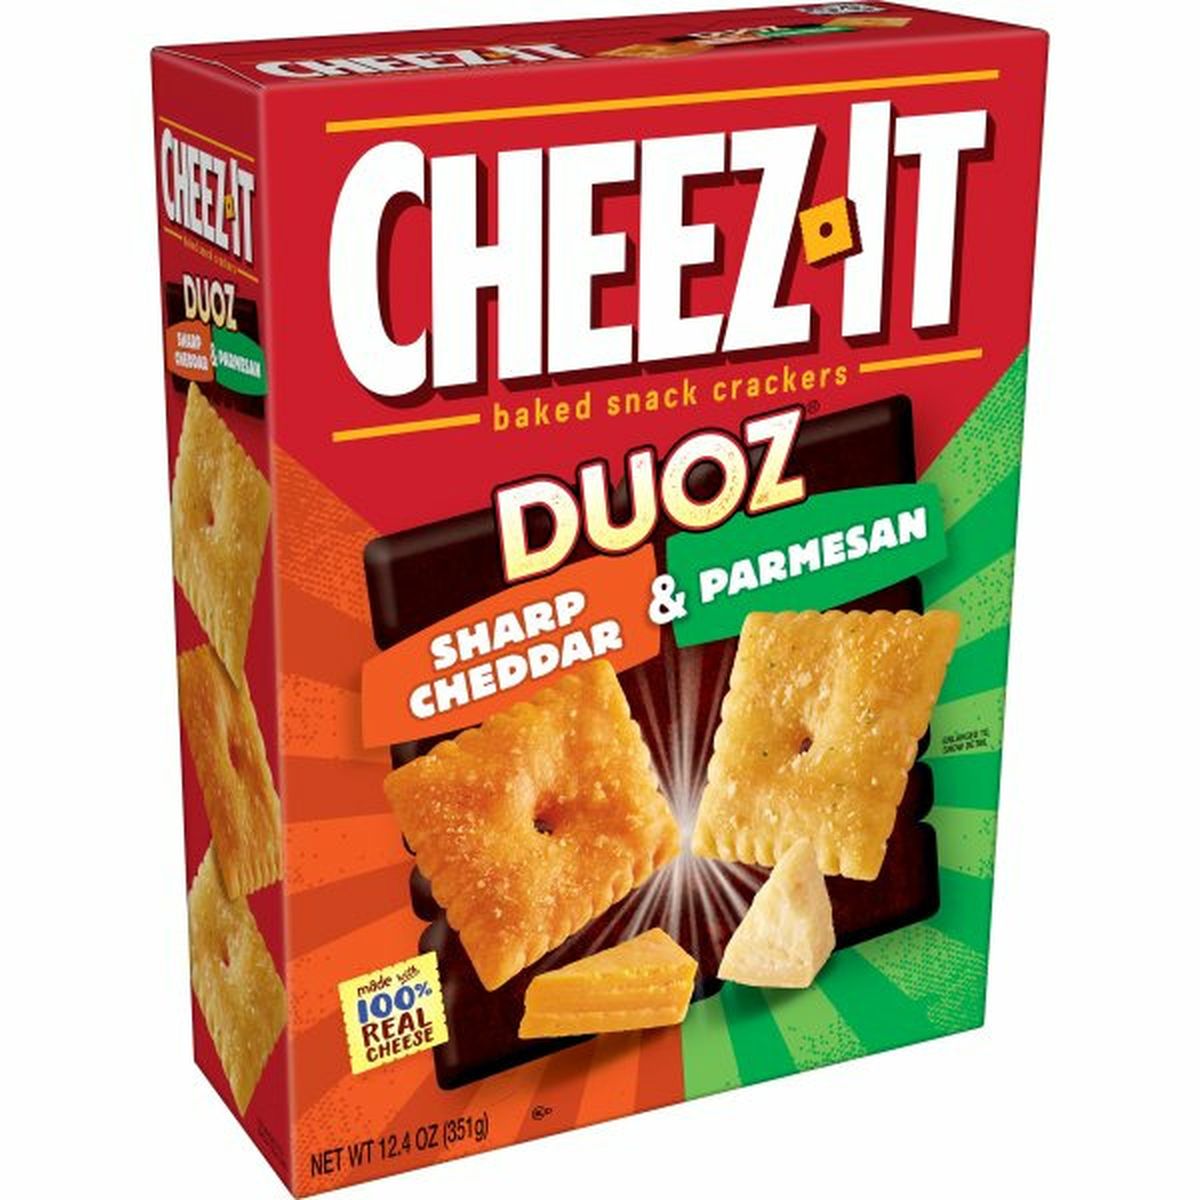 Calories in Cheez-It Crackers Cheez-It Baked Snack Cheese Crackers, Sharp Cheddar & Parmesan, 12.4oz